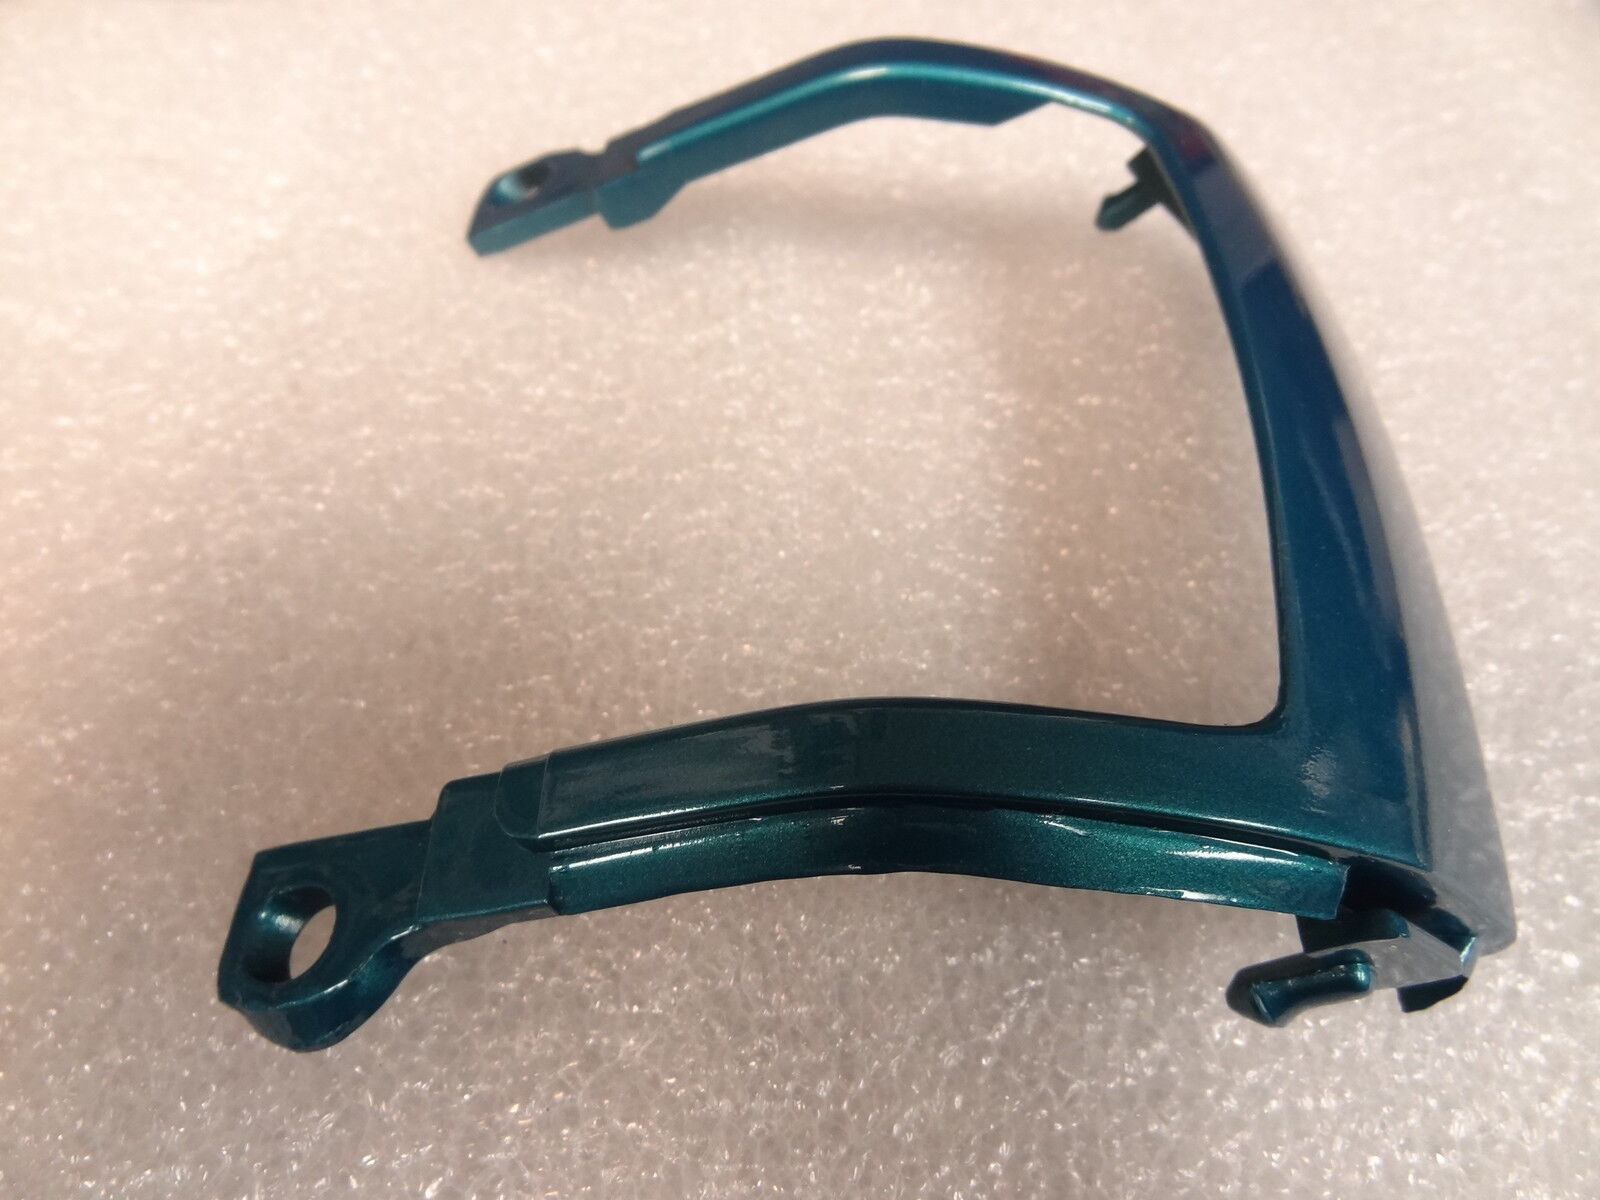 Kawasaki NOS 14090-1255-TZ Teal Green Lower Tail Cover ZX ZX600 